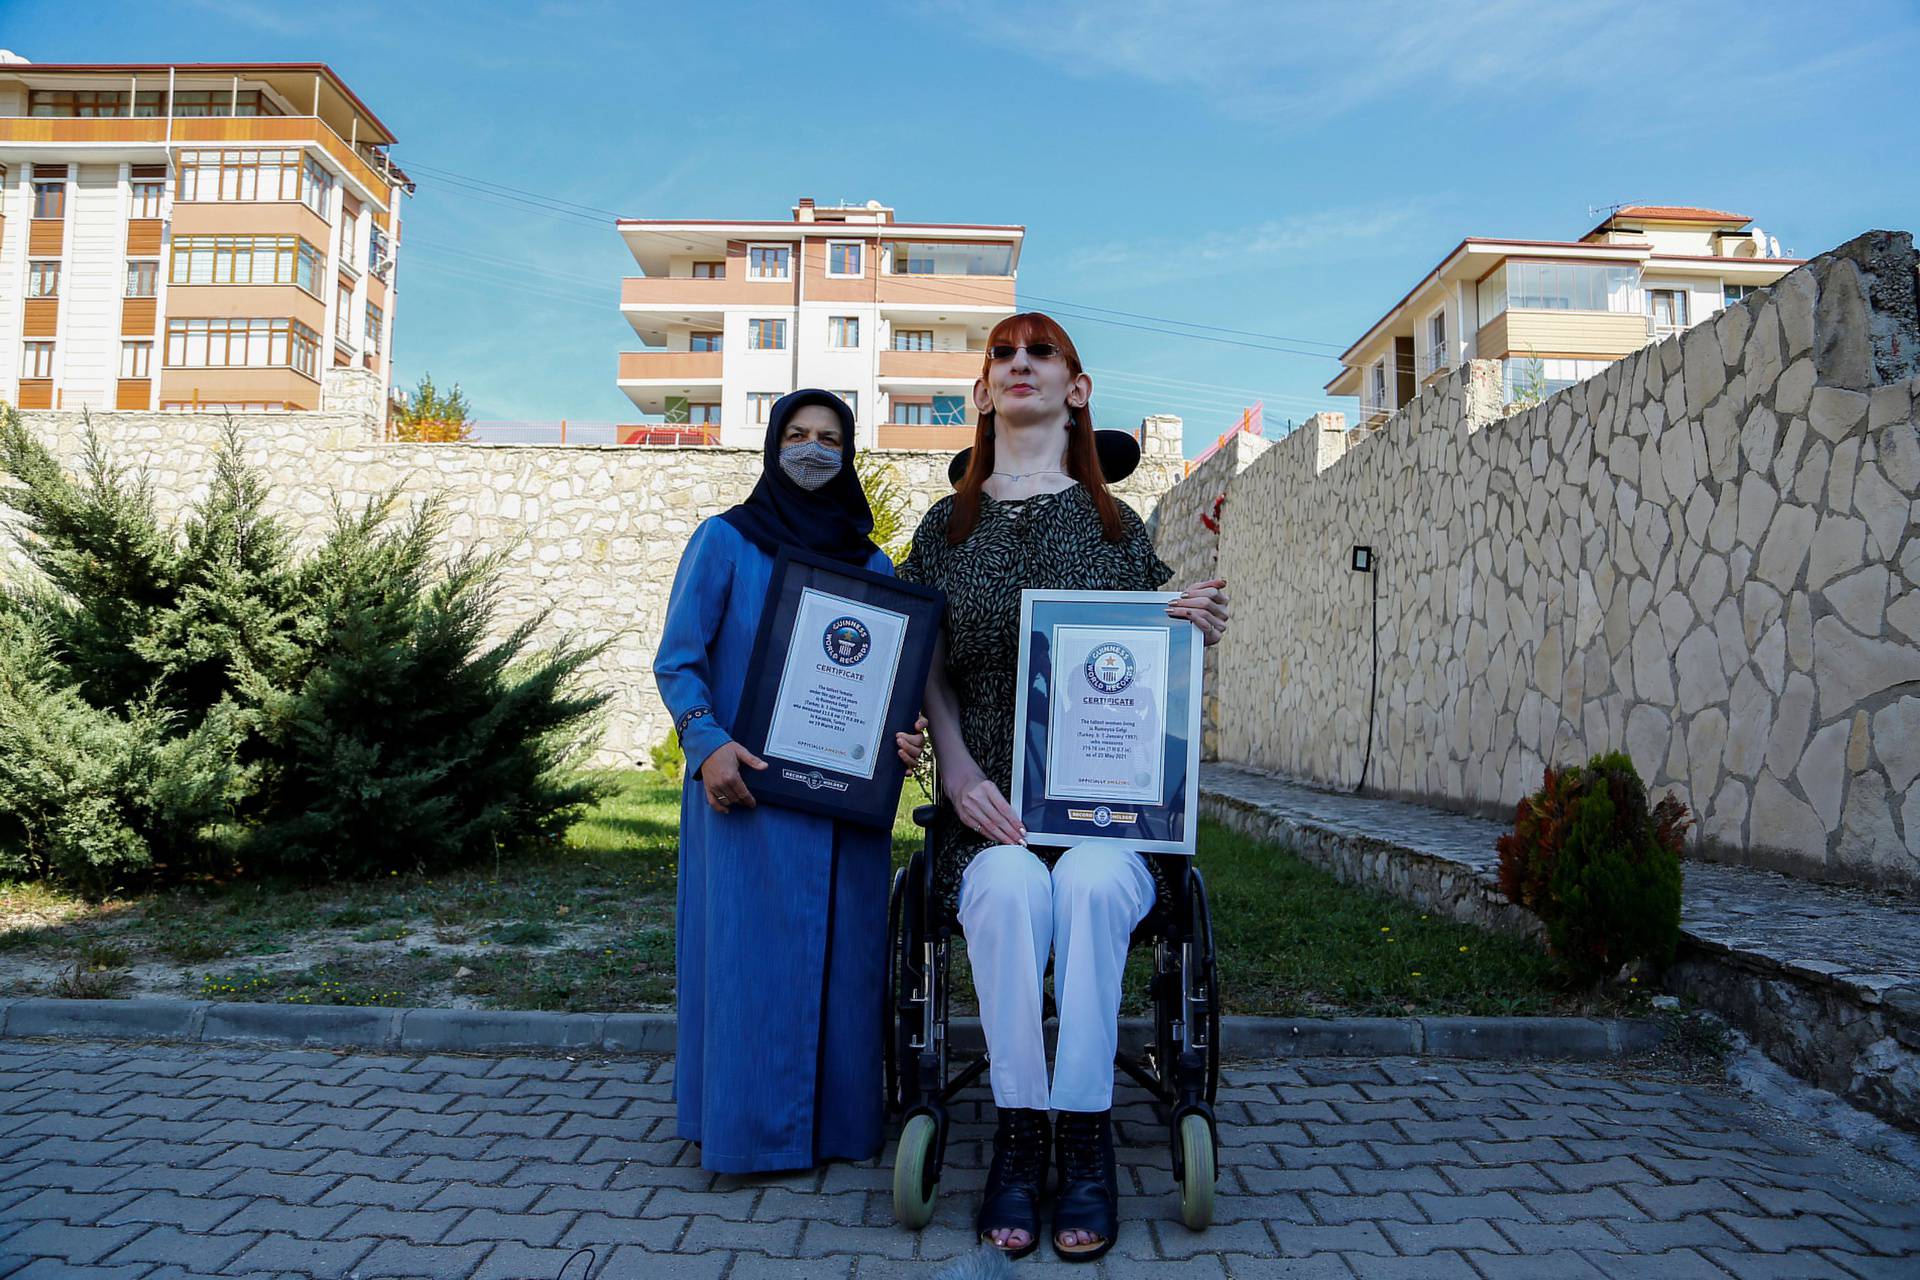 World's tallest woman Rumeysa Gelgi attends a news conference in Karabuk